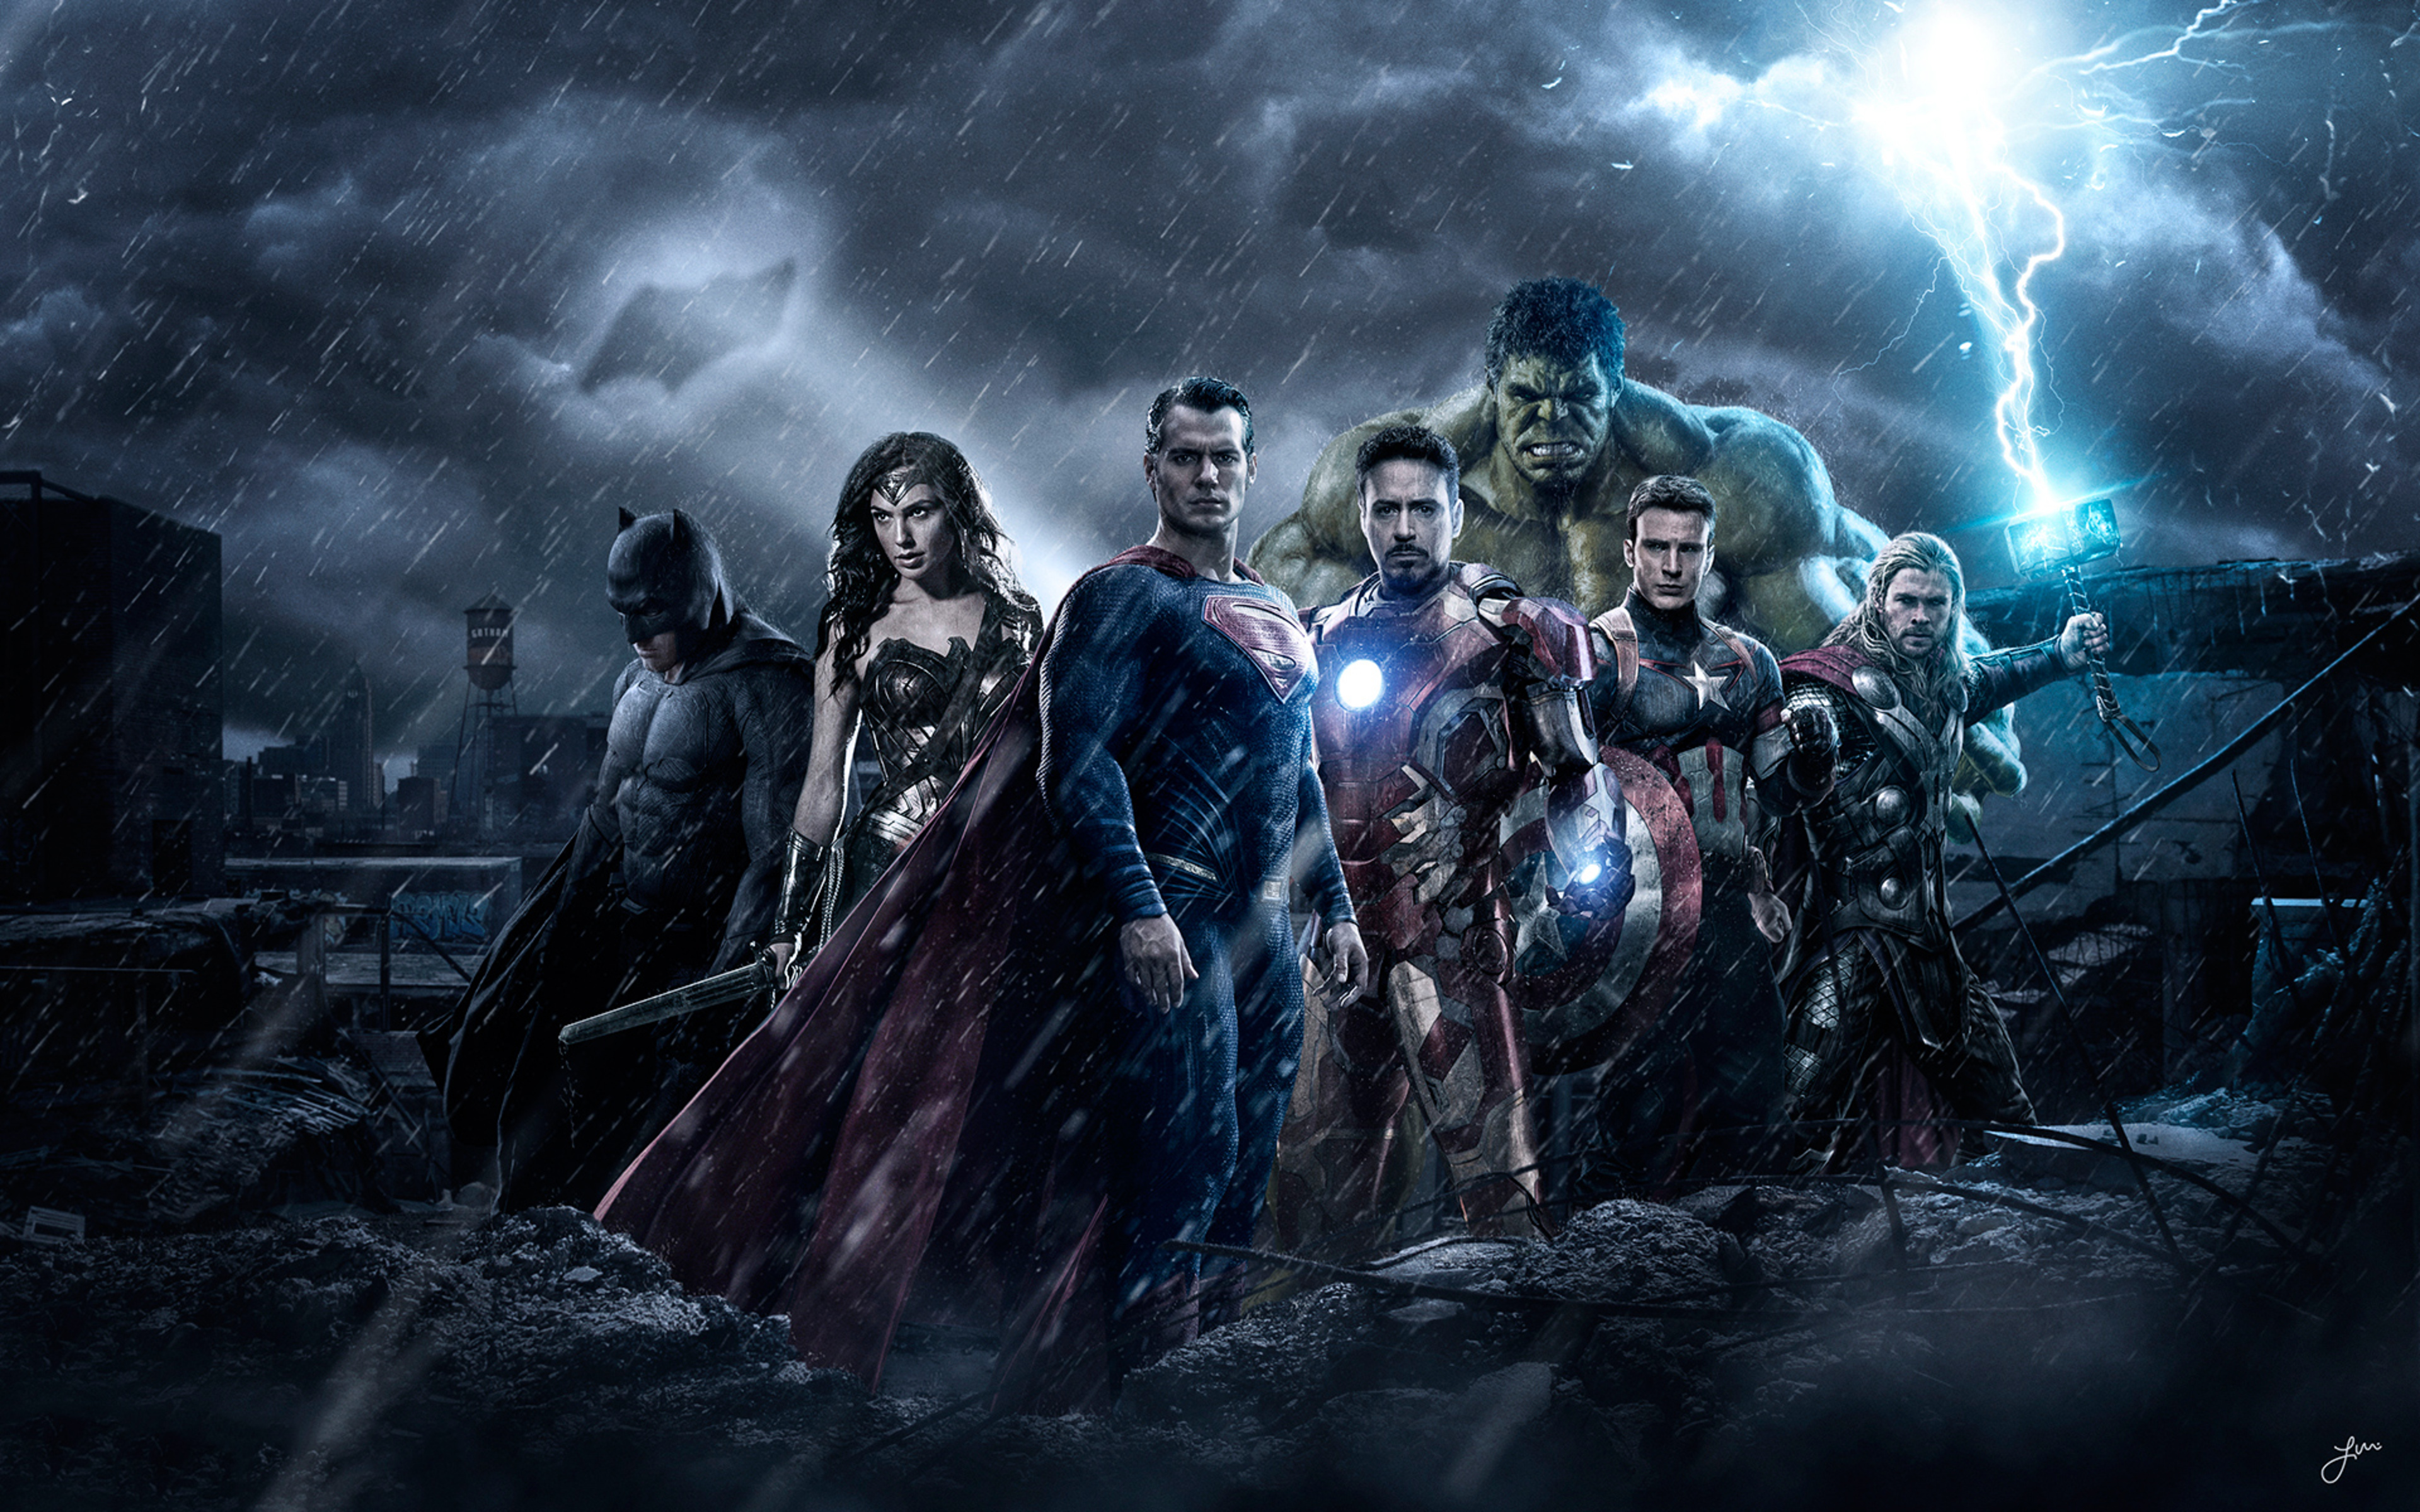 The Avengers Vs Justice League In 3840x2400 Resolution. the-avengers-vs-jus...